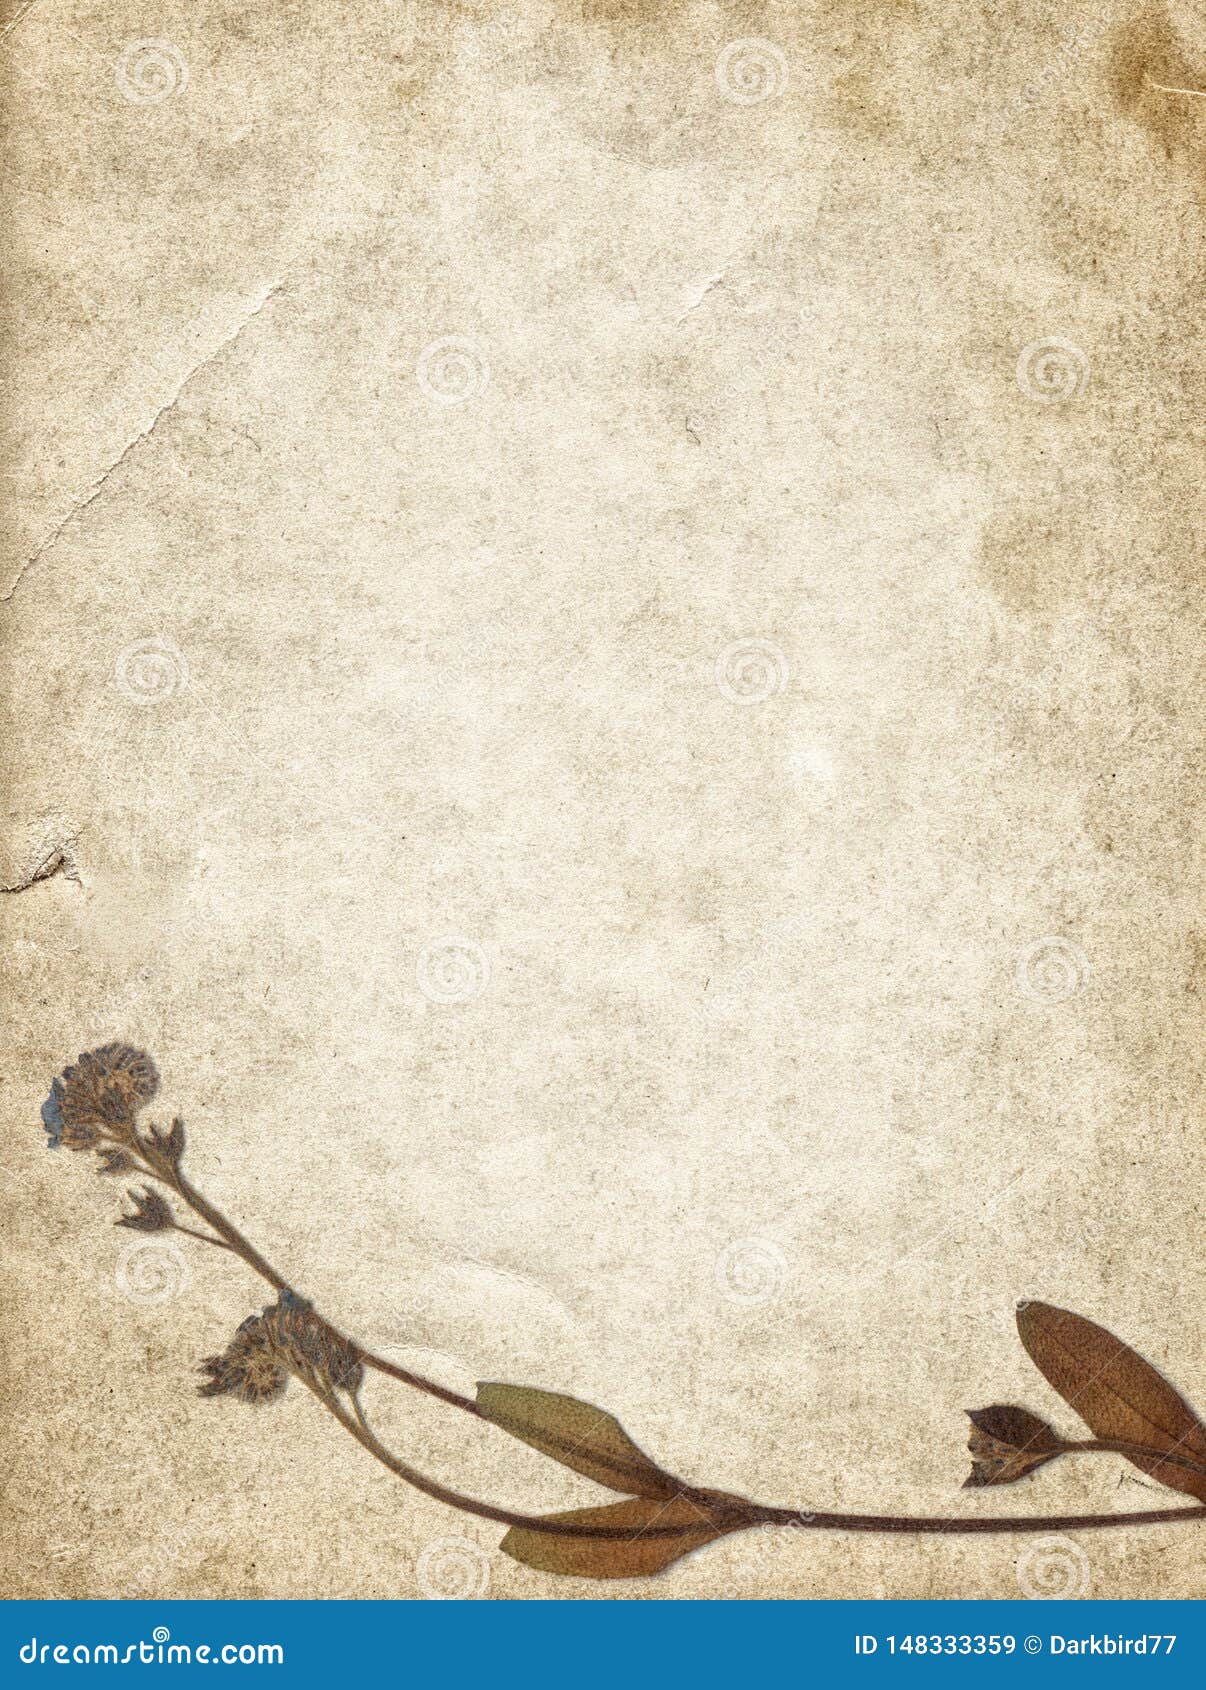 Photo of dried flowers on textured paper (2478084)